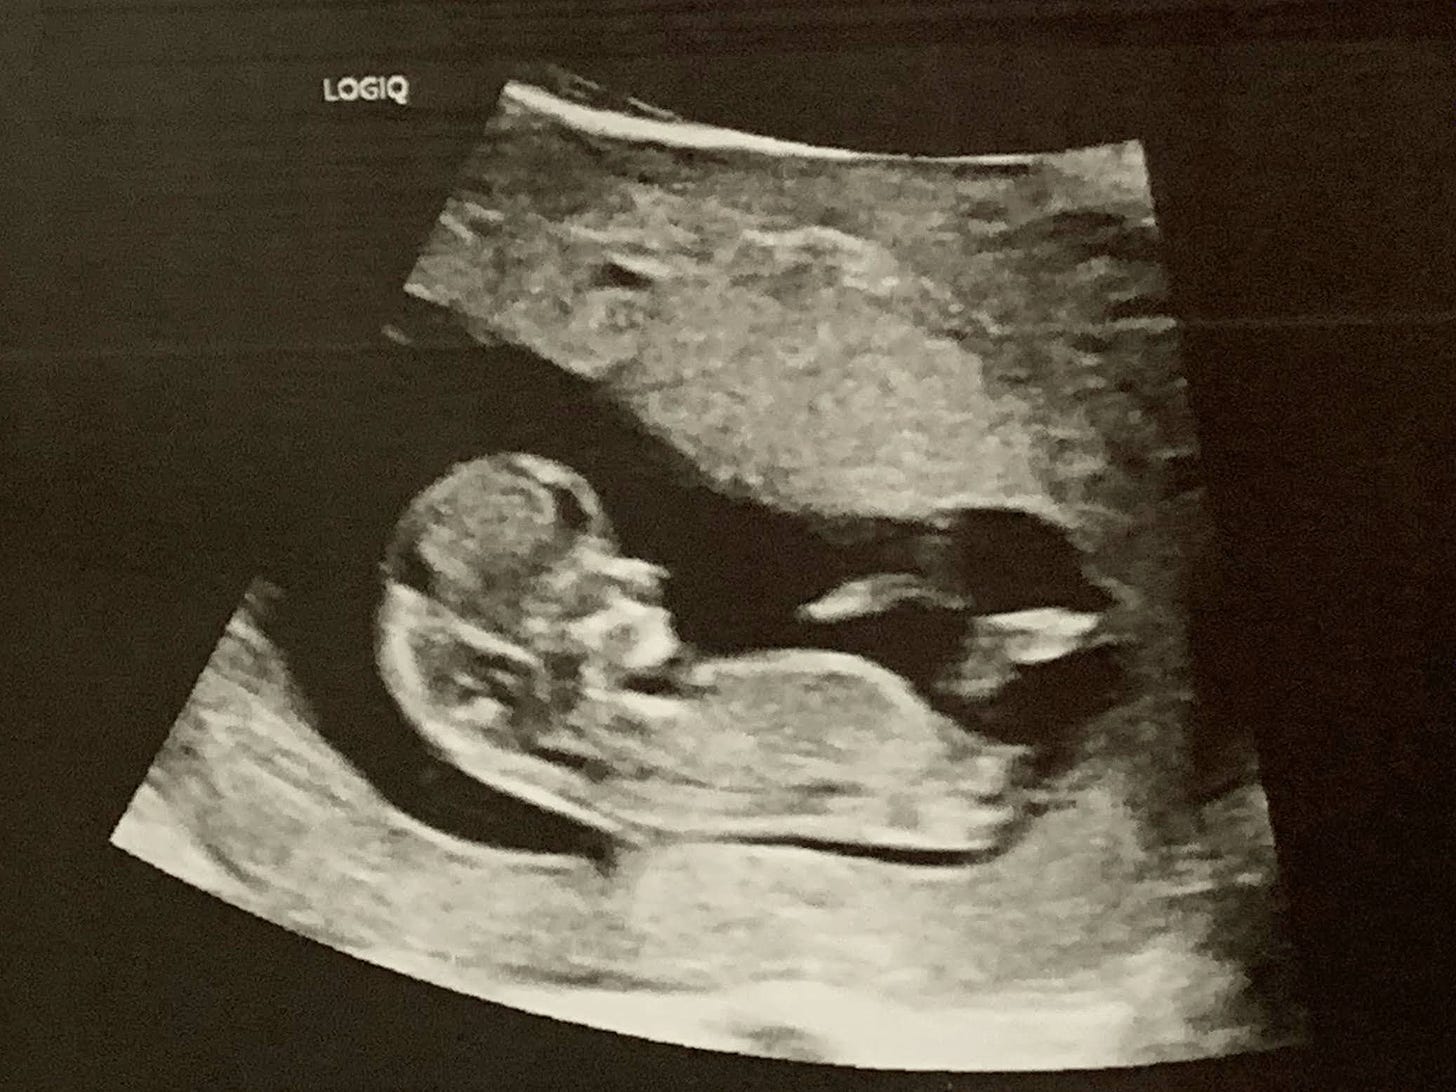 Ultrasound image of a baby in the womb